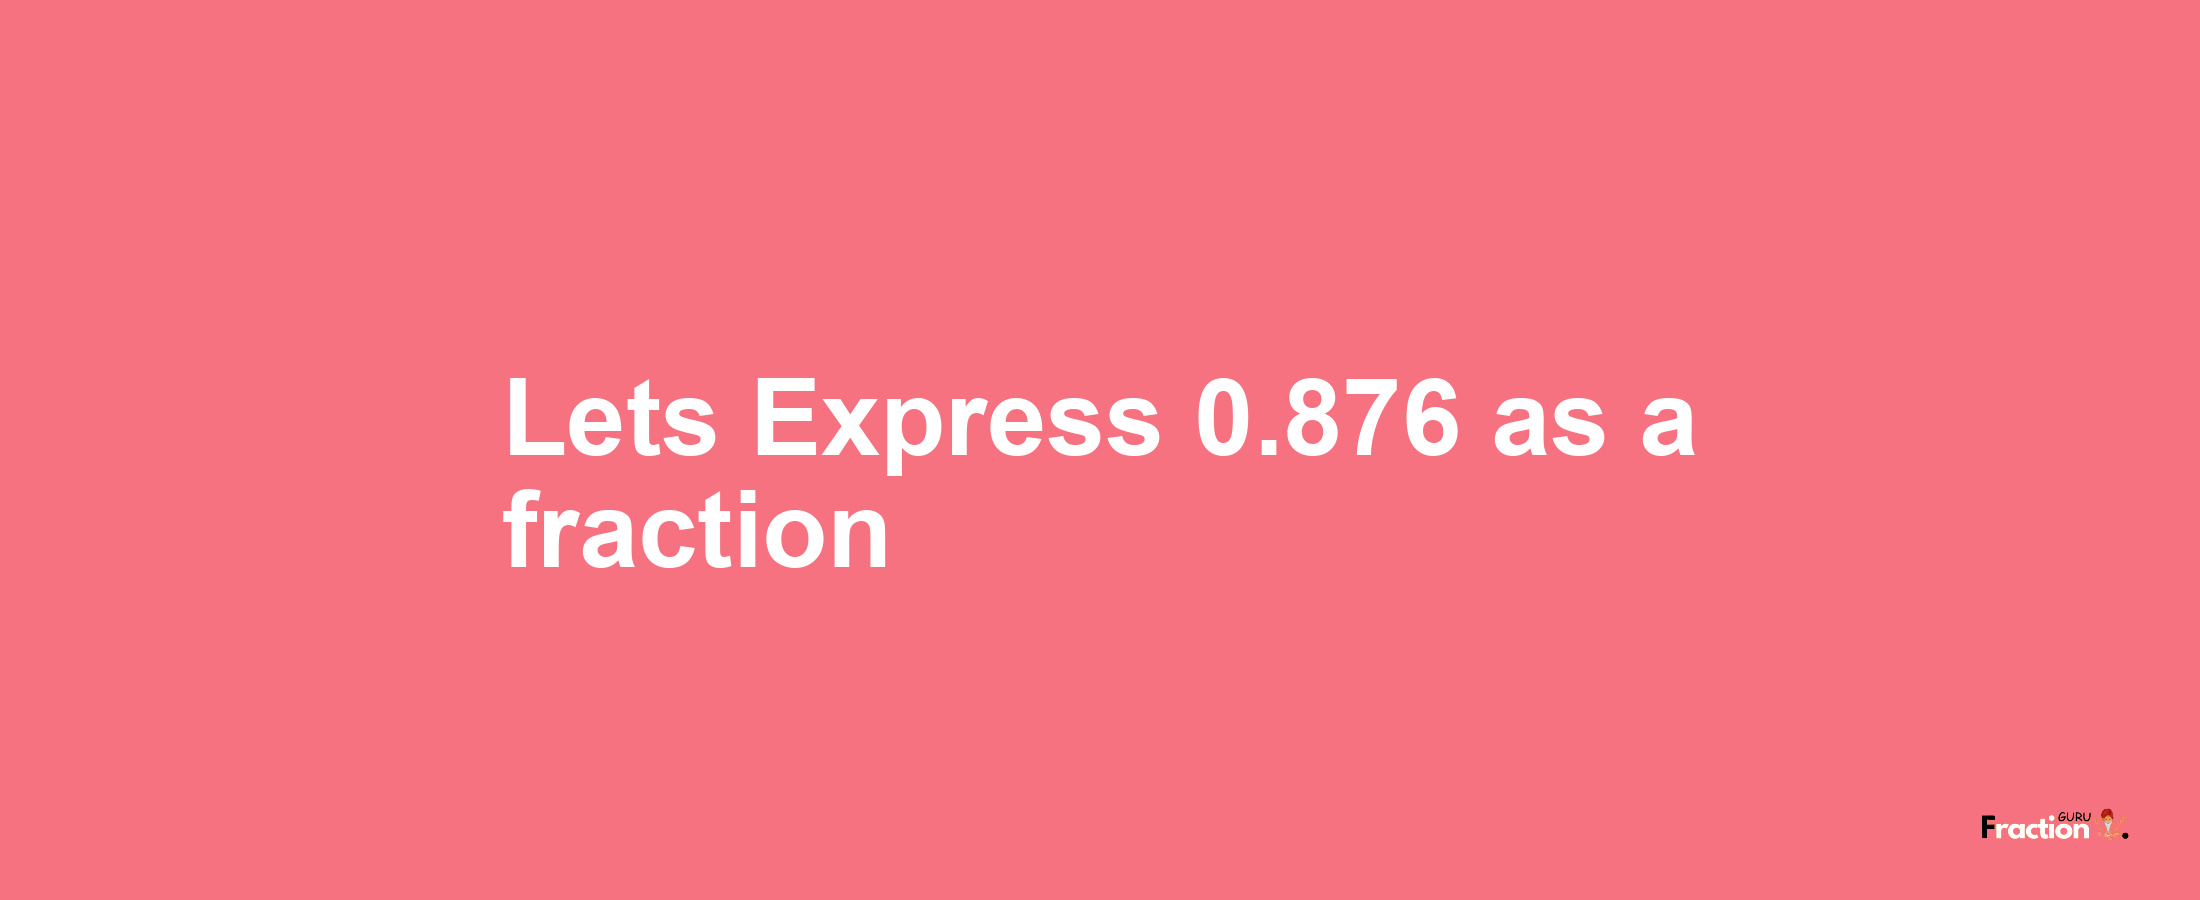 Lets Express 0.876 as afraction